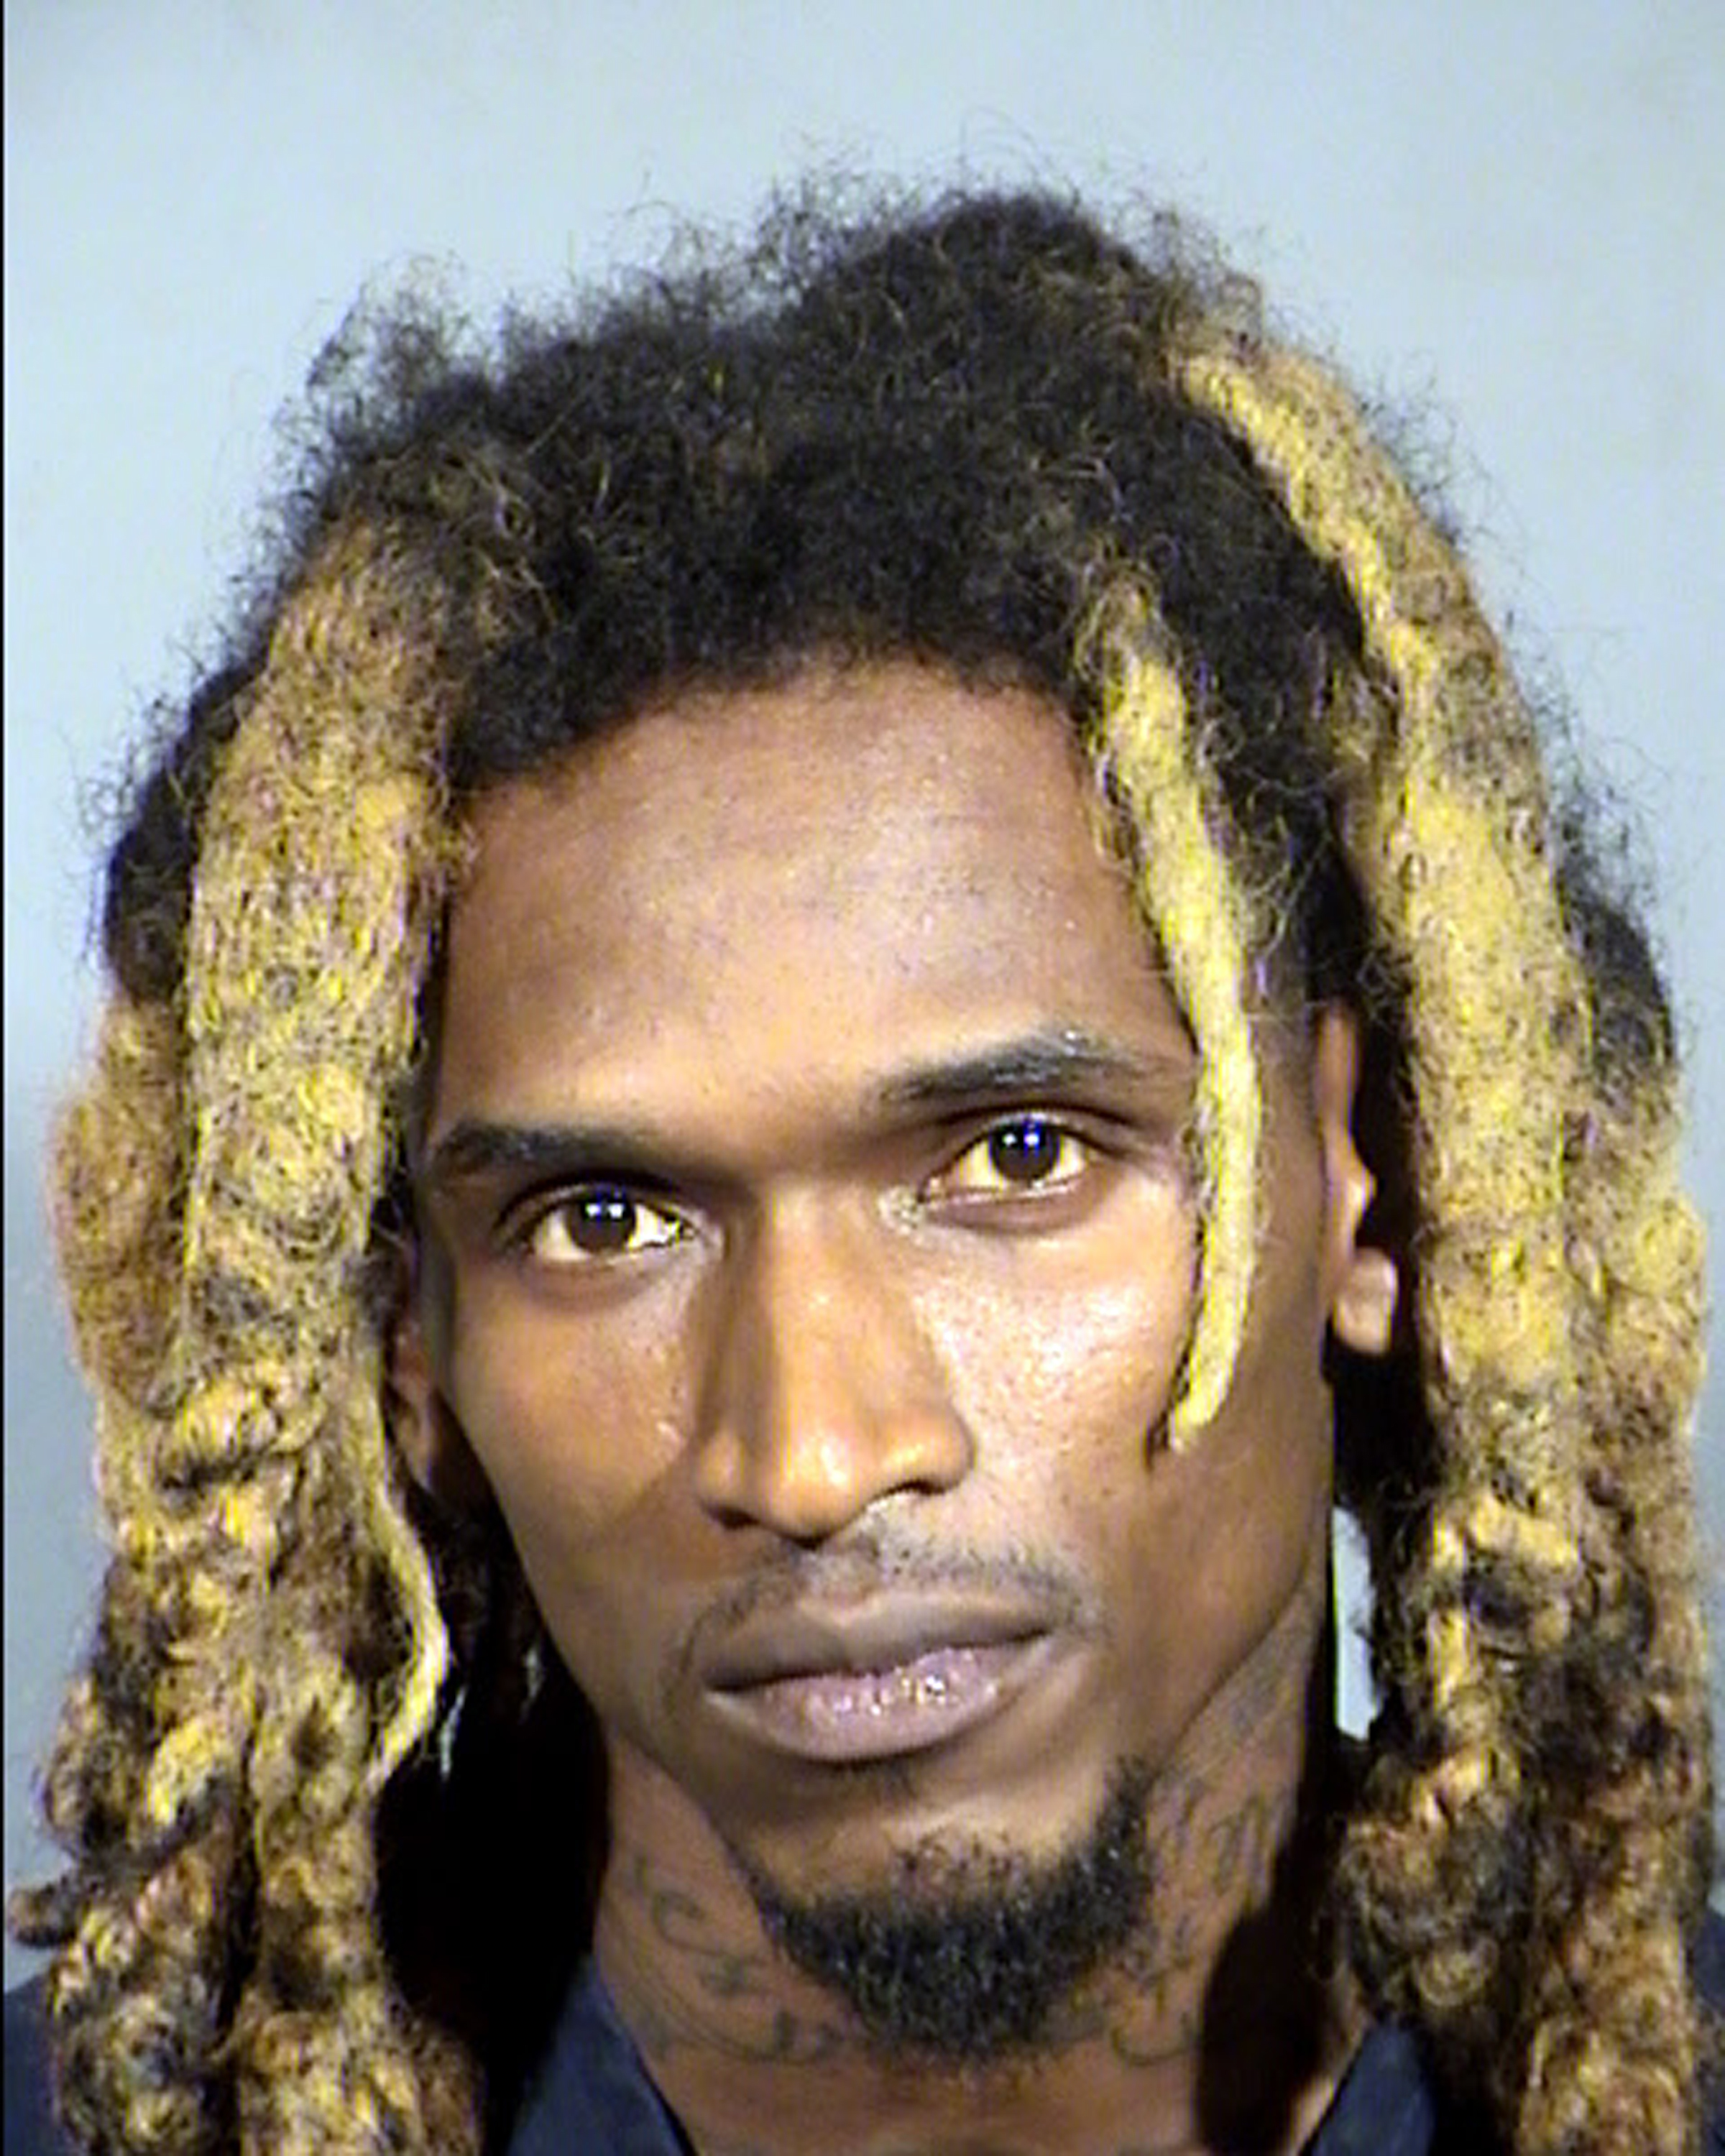 This undated Clark County Detention Center booking photo shows Moises Johnson, of West Palm Beach, Fla. Police say Johnson was arrested Tuesday, Feb. 21, 2017, pending a court appearance on felony assault and weapon charges after a gunshot was fired in the air during a fight between the three-member hip hop music group Migos and rapper Sean Kingston outside a Las Vegas Strip conference venue. No injuries were reported. (Clark County Detention Center/Las Vegas Metropolitan Police Department via AP)